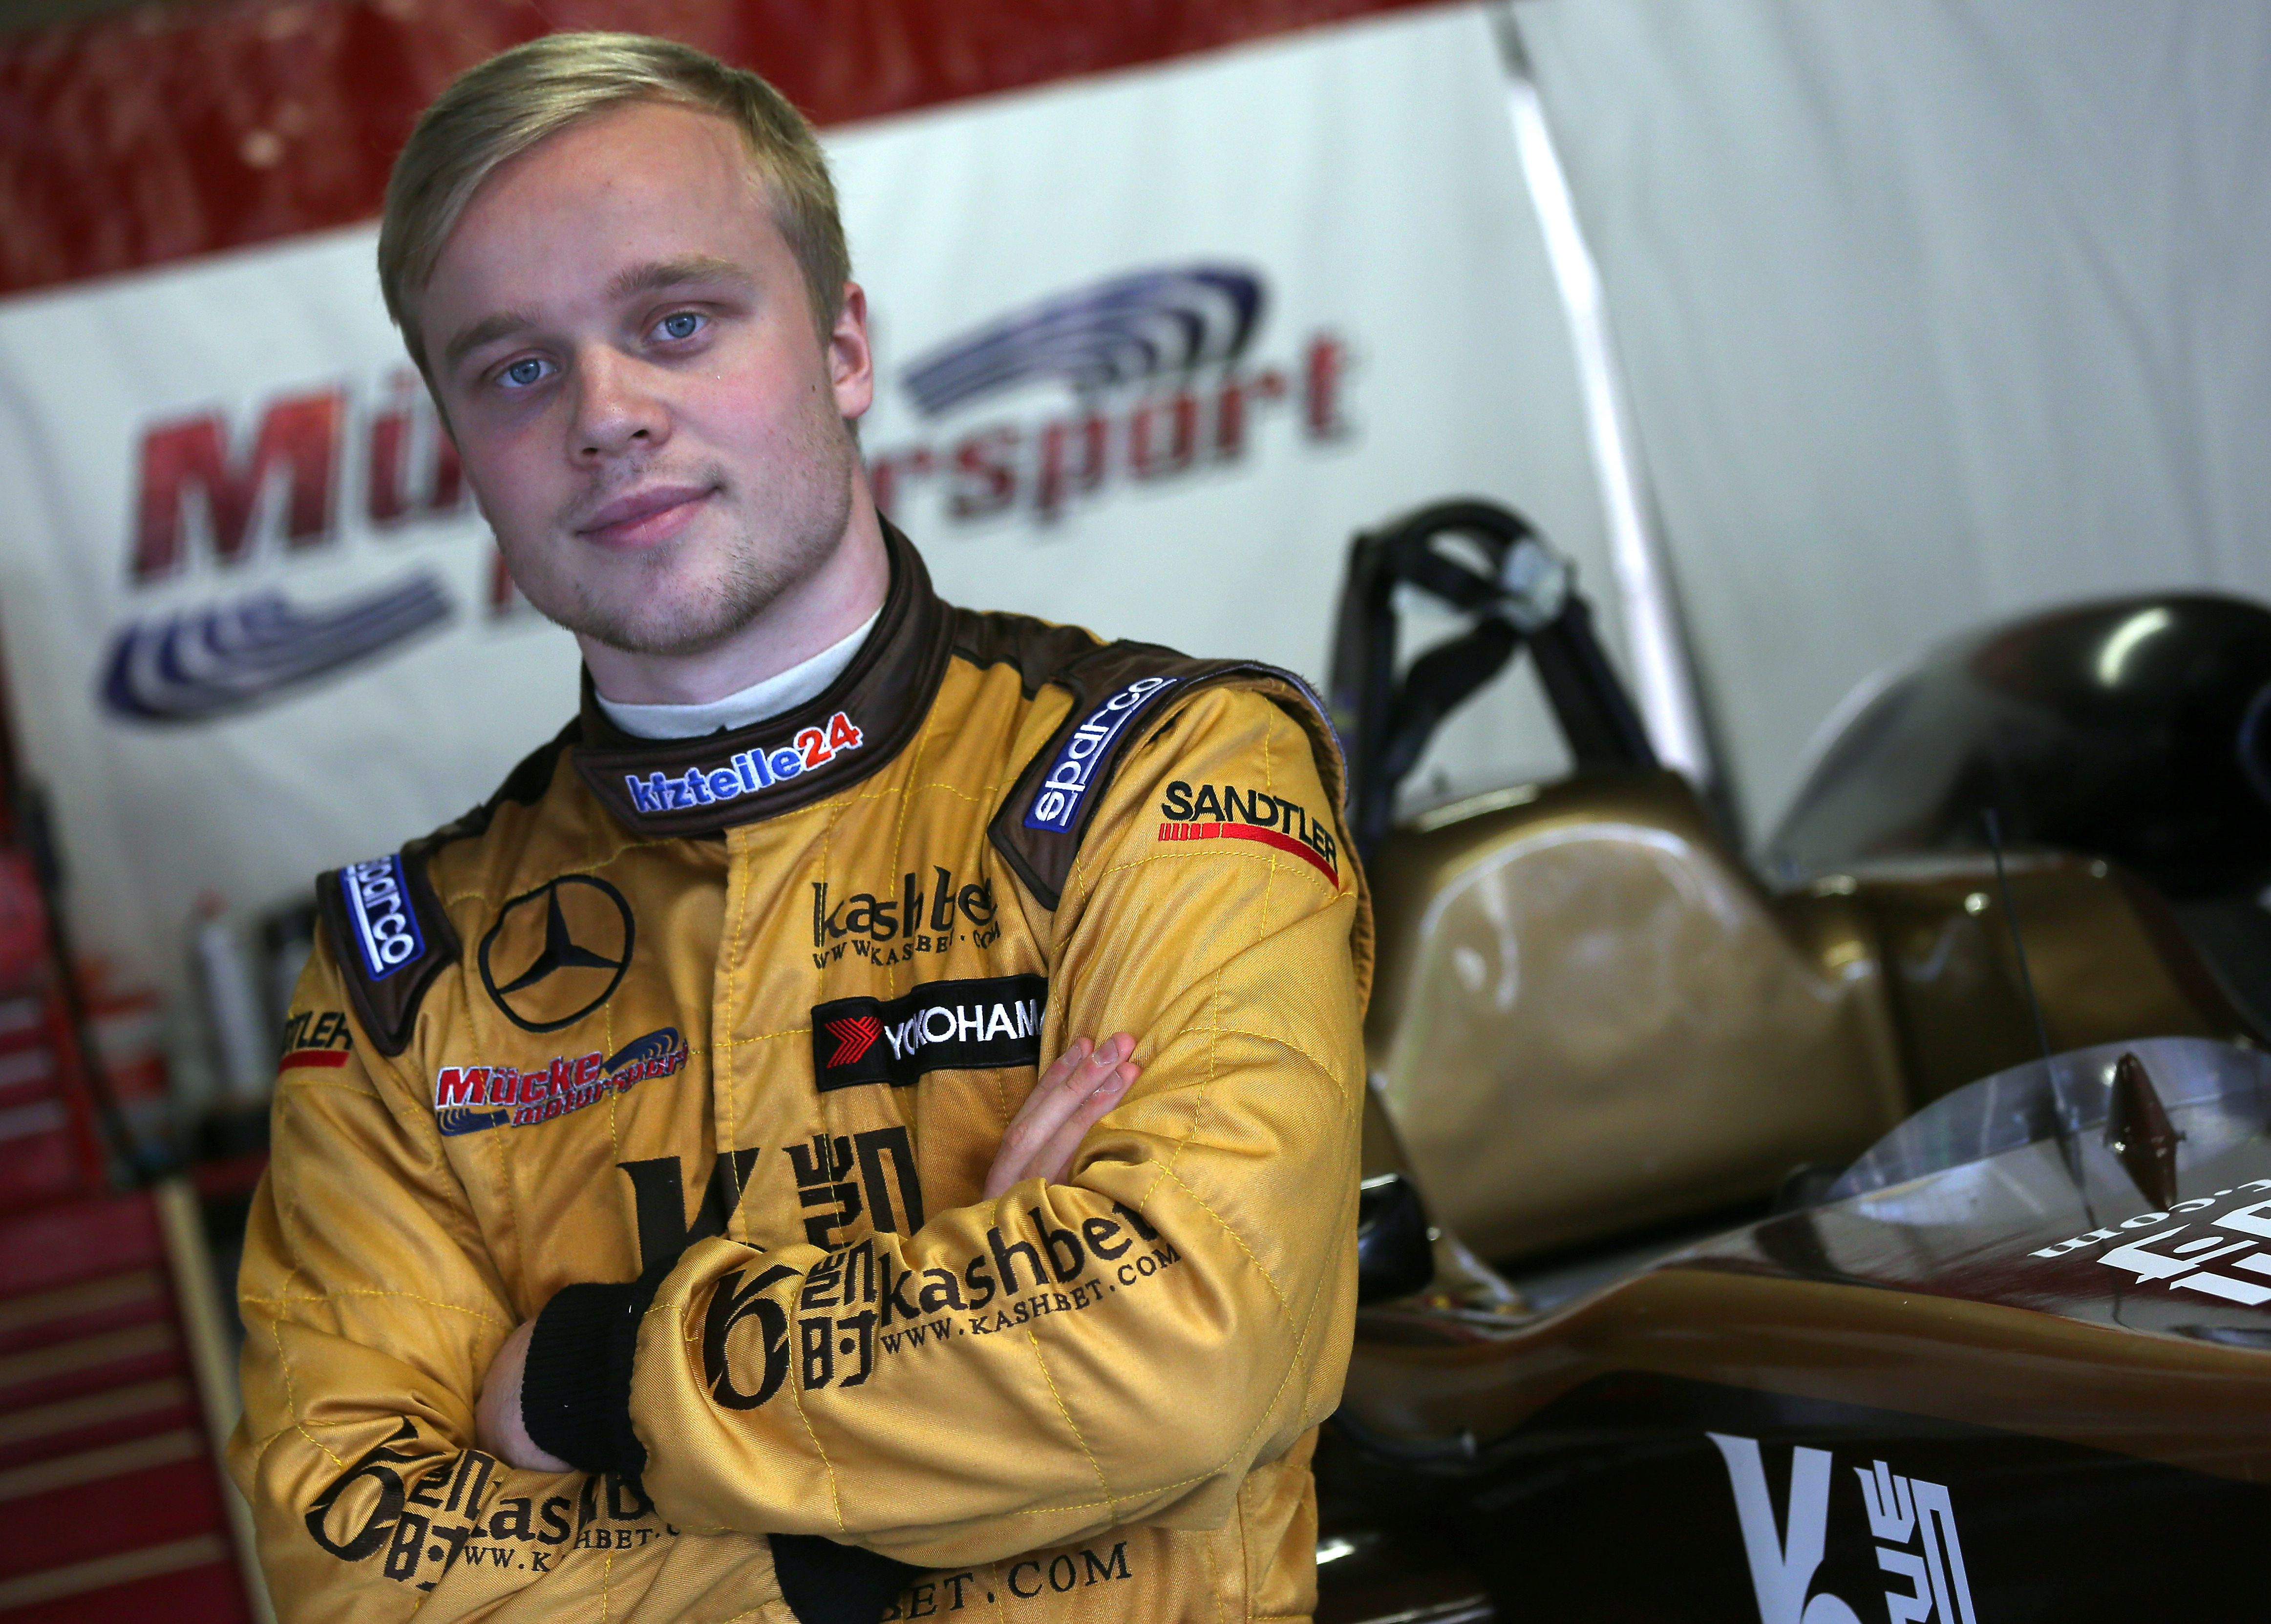 Swede Felix Rosenqvist is the only driver to have won the Macau Grand Prix, Masters of Formula Three (twice) and European F3 Championship.